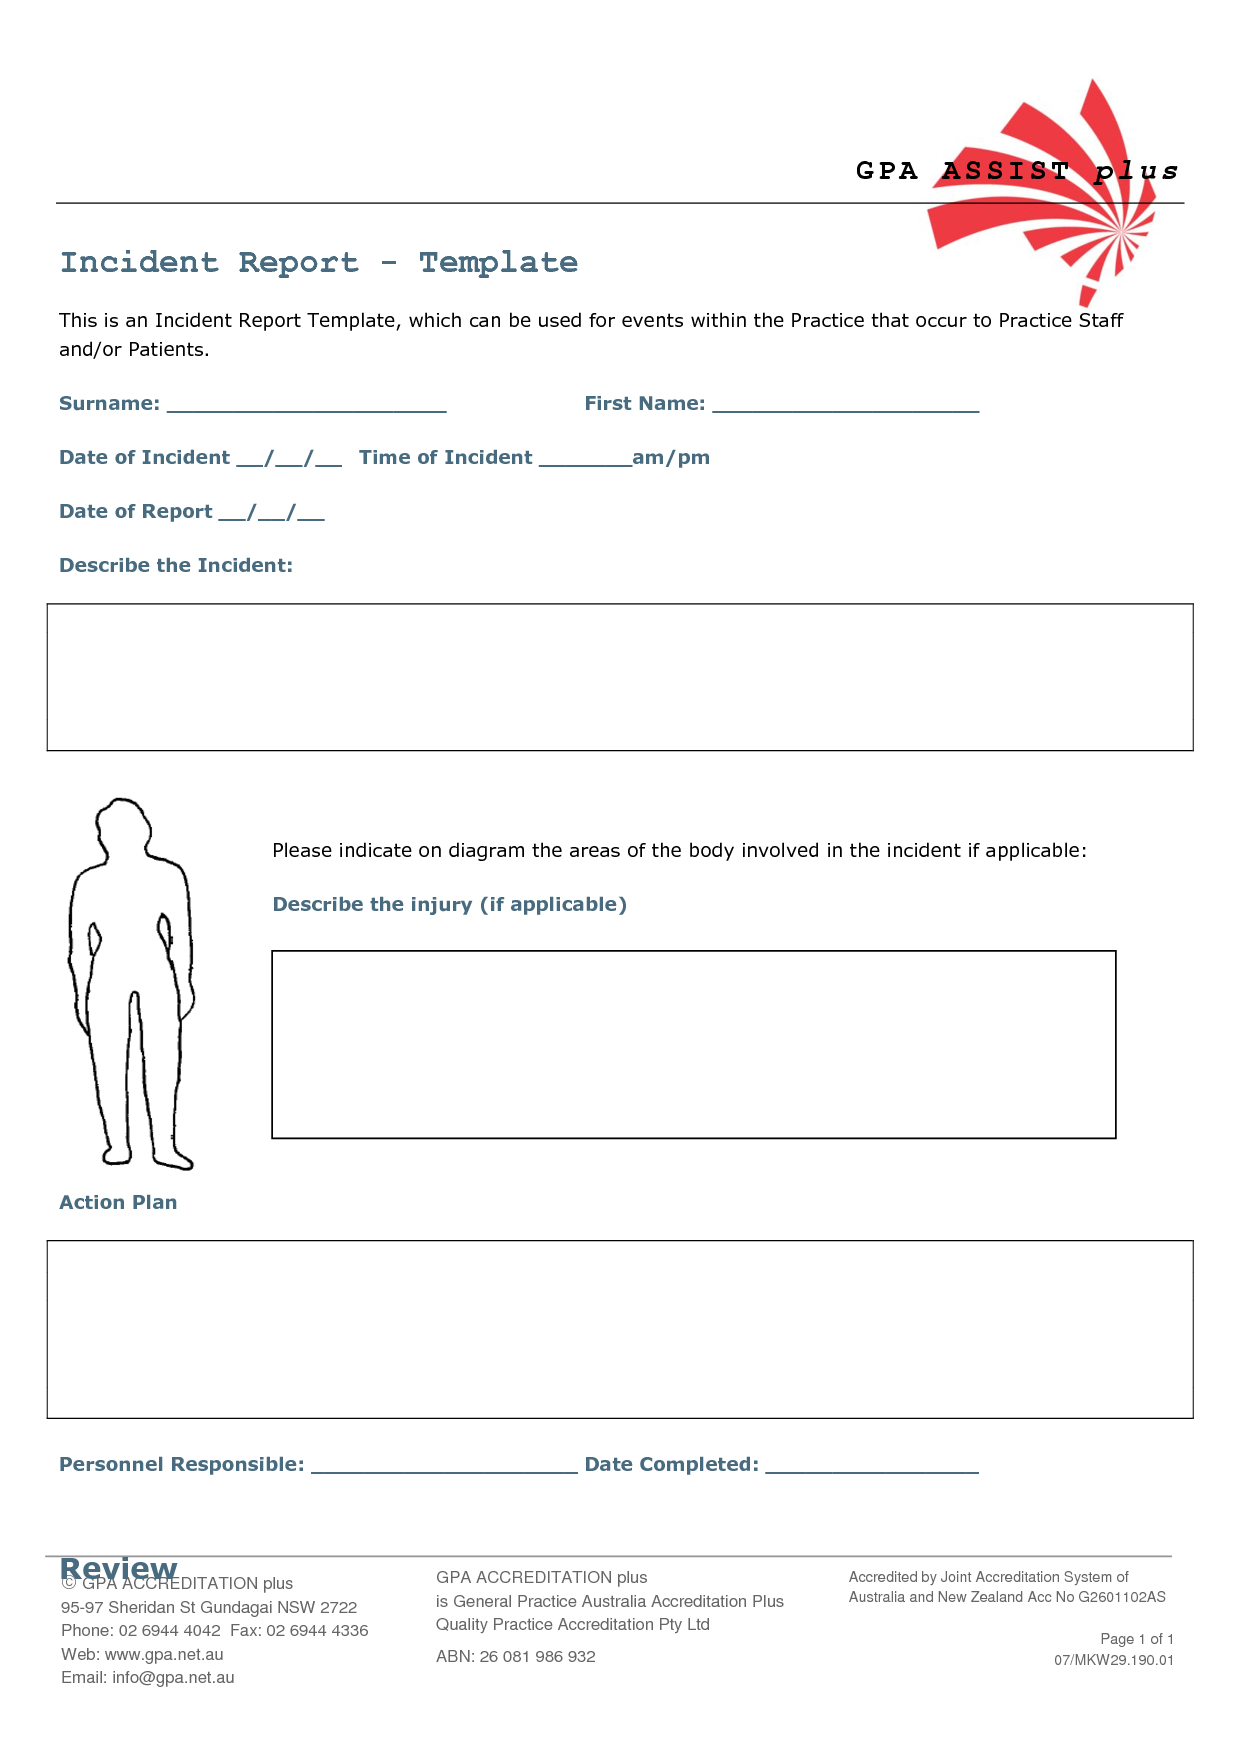 Incident Report Template Click Here For A Free Video With Incident Report Template Microsoft